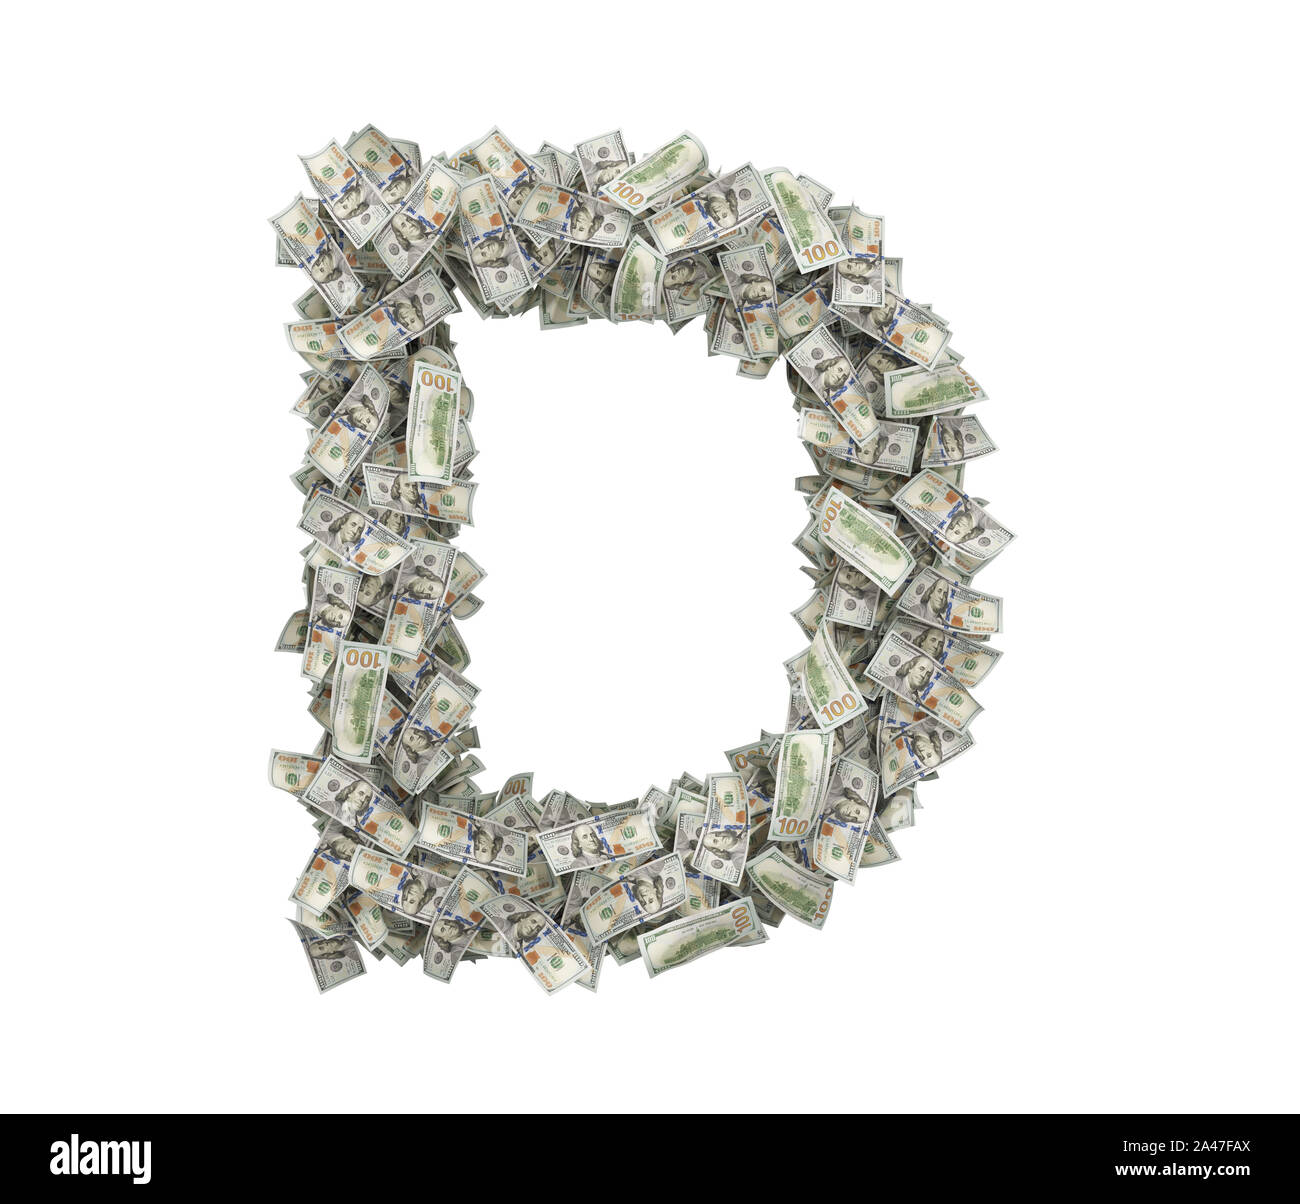 3d rendering of a large isolated large letter D made of many one hundred dollar bills. Money and bills. American currency. Alphabet and letters. Stock Photo